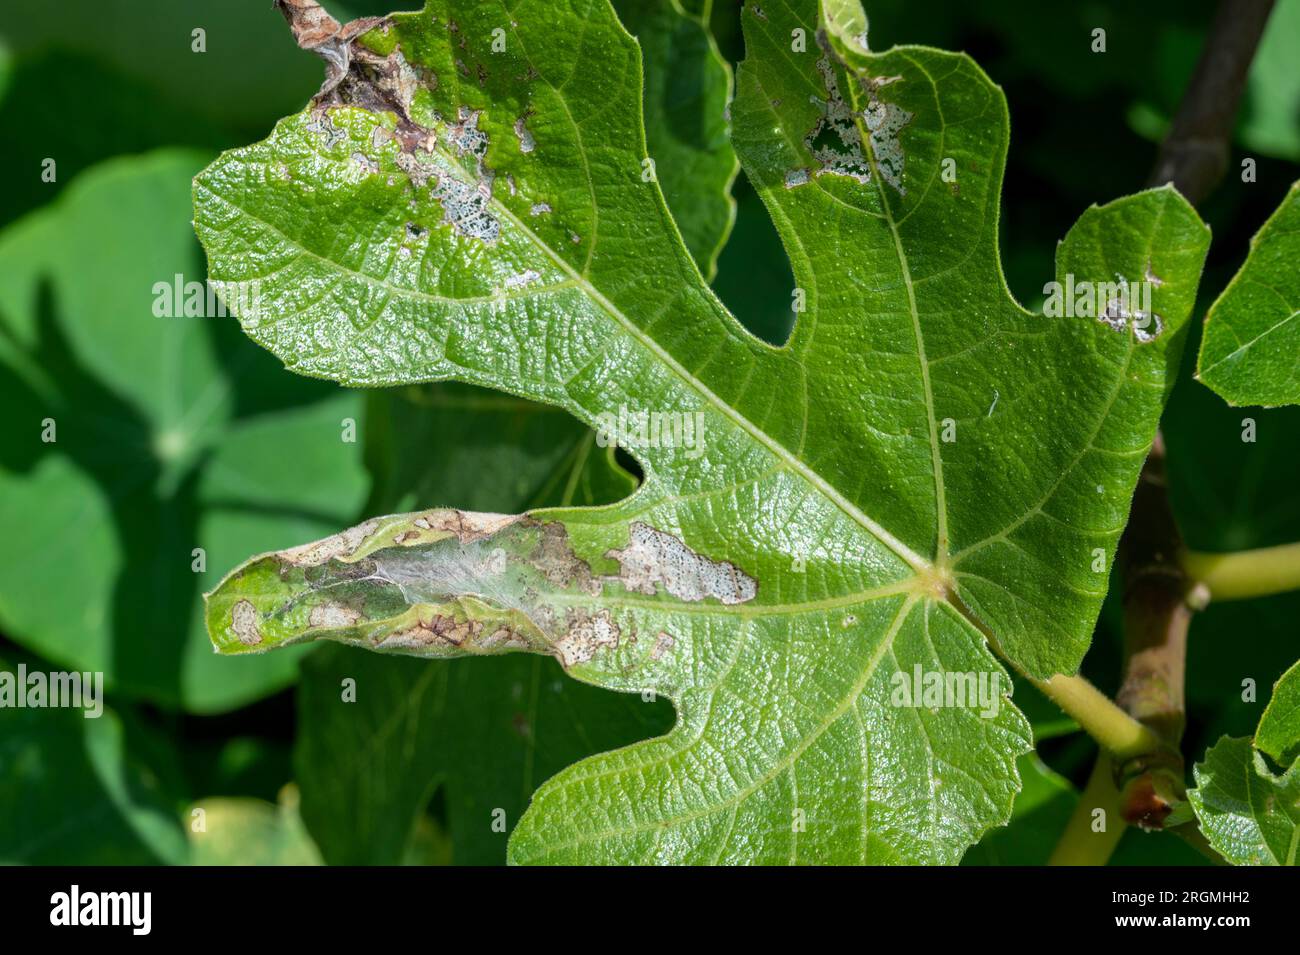 Cocoon of Choreutis nemorana / Fig Leaf Skeletoniser. First seen in the UK 2014 now becoming more widespresd. Stock Photo